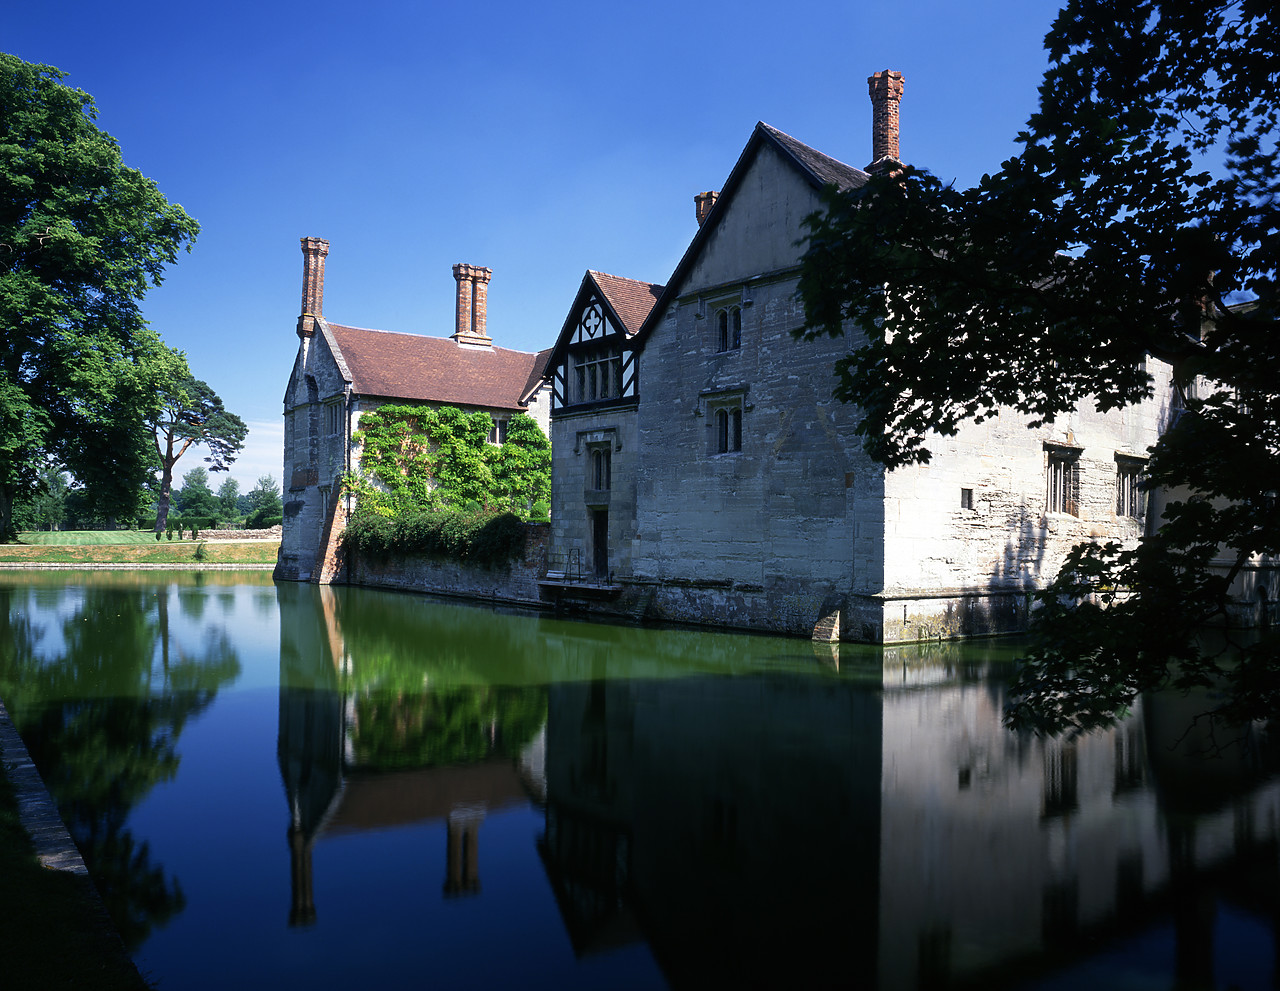 #892321-1 - Medieval Moated Manor House, Baddesley Clinton,
Warwickshire, England